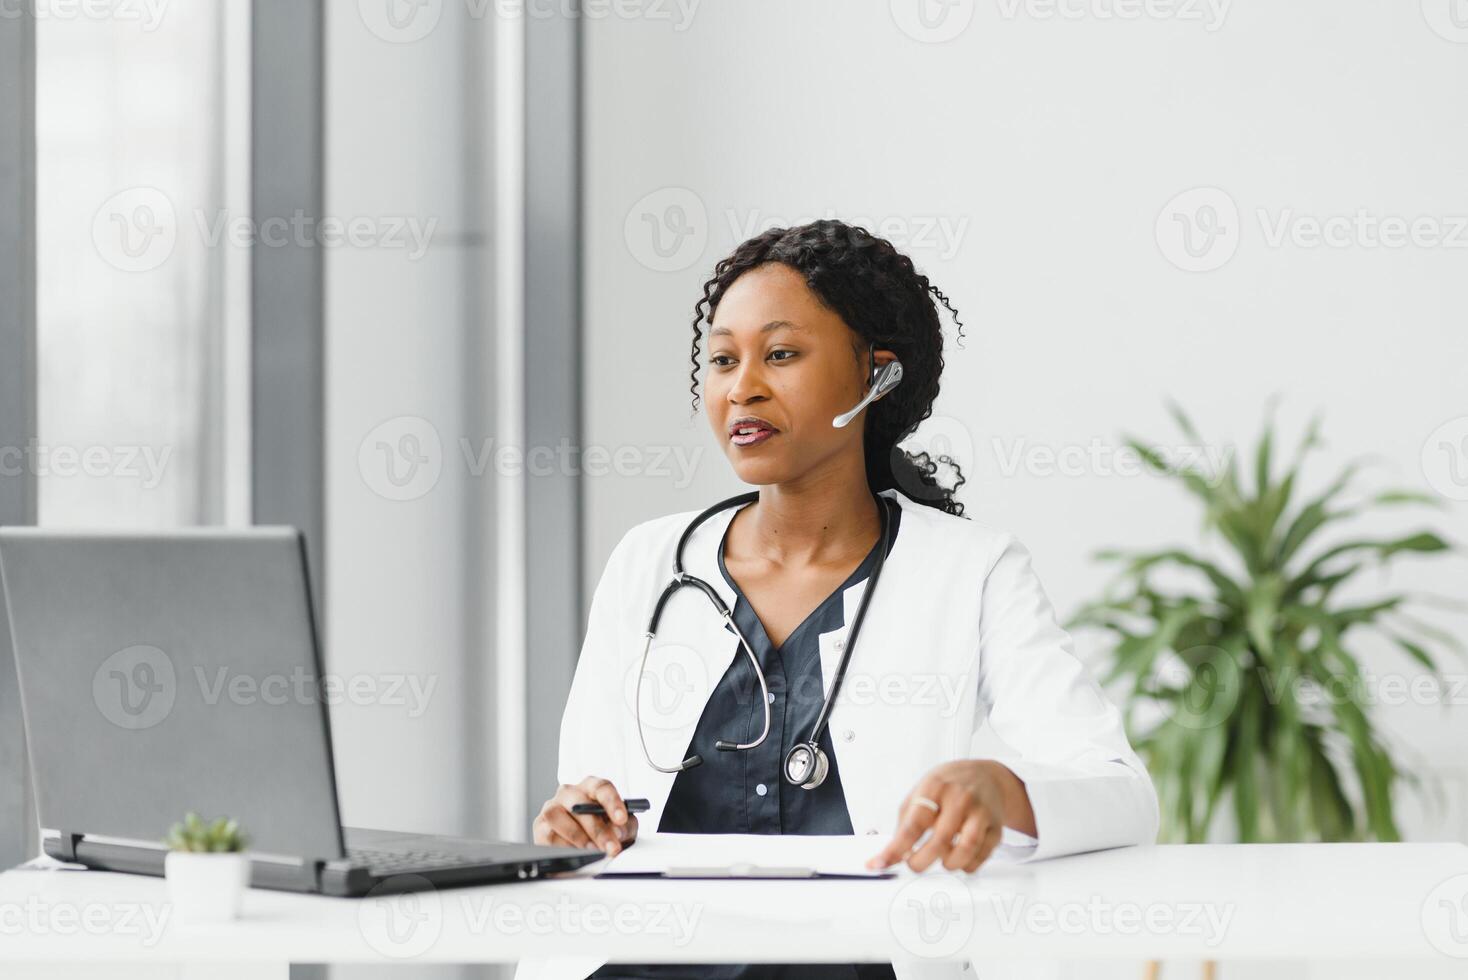 medicine, online service and healthcare concept - happy smiling african american female doctor or nurse with headset and laptop having conference or video call at hospital. photo